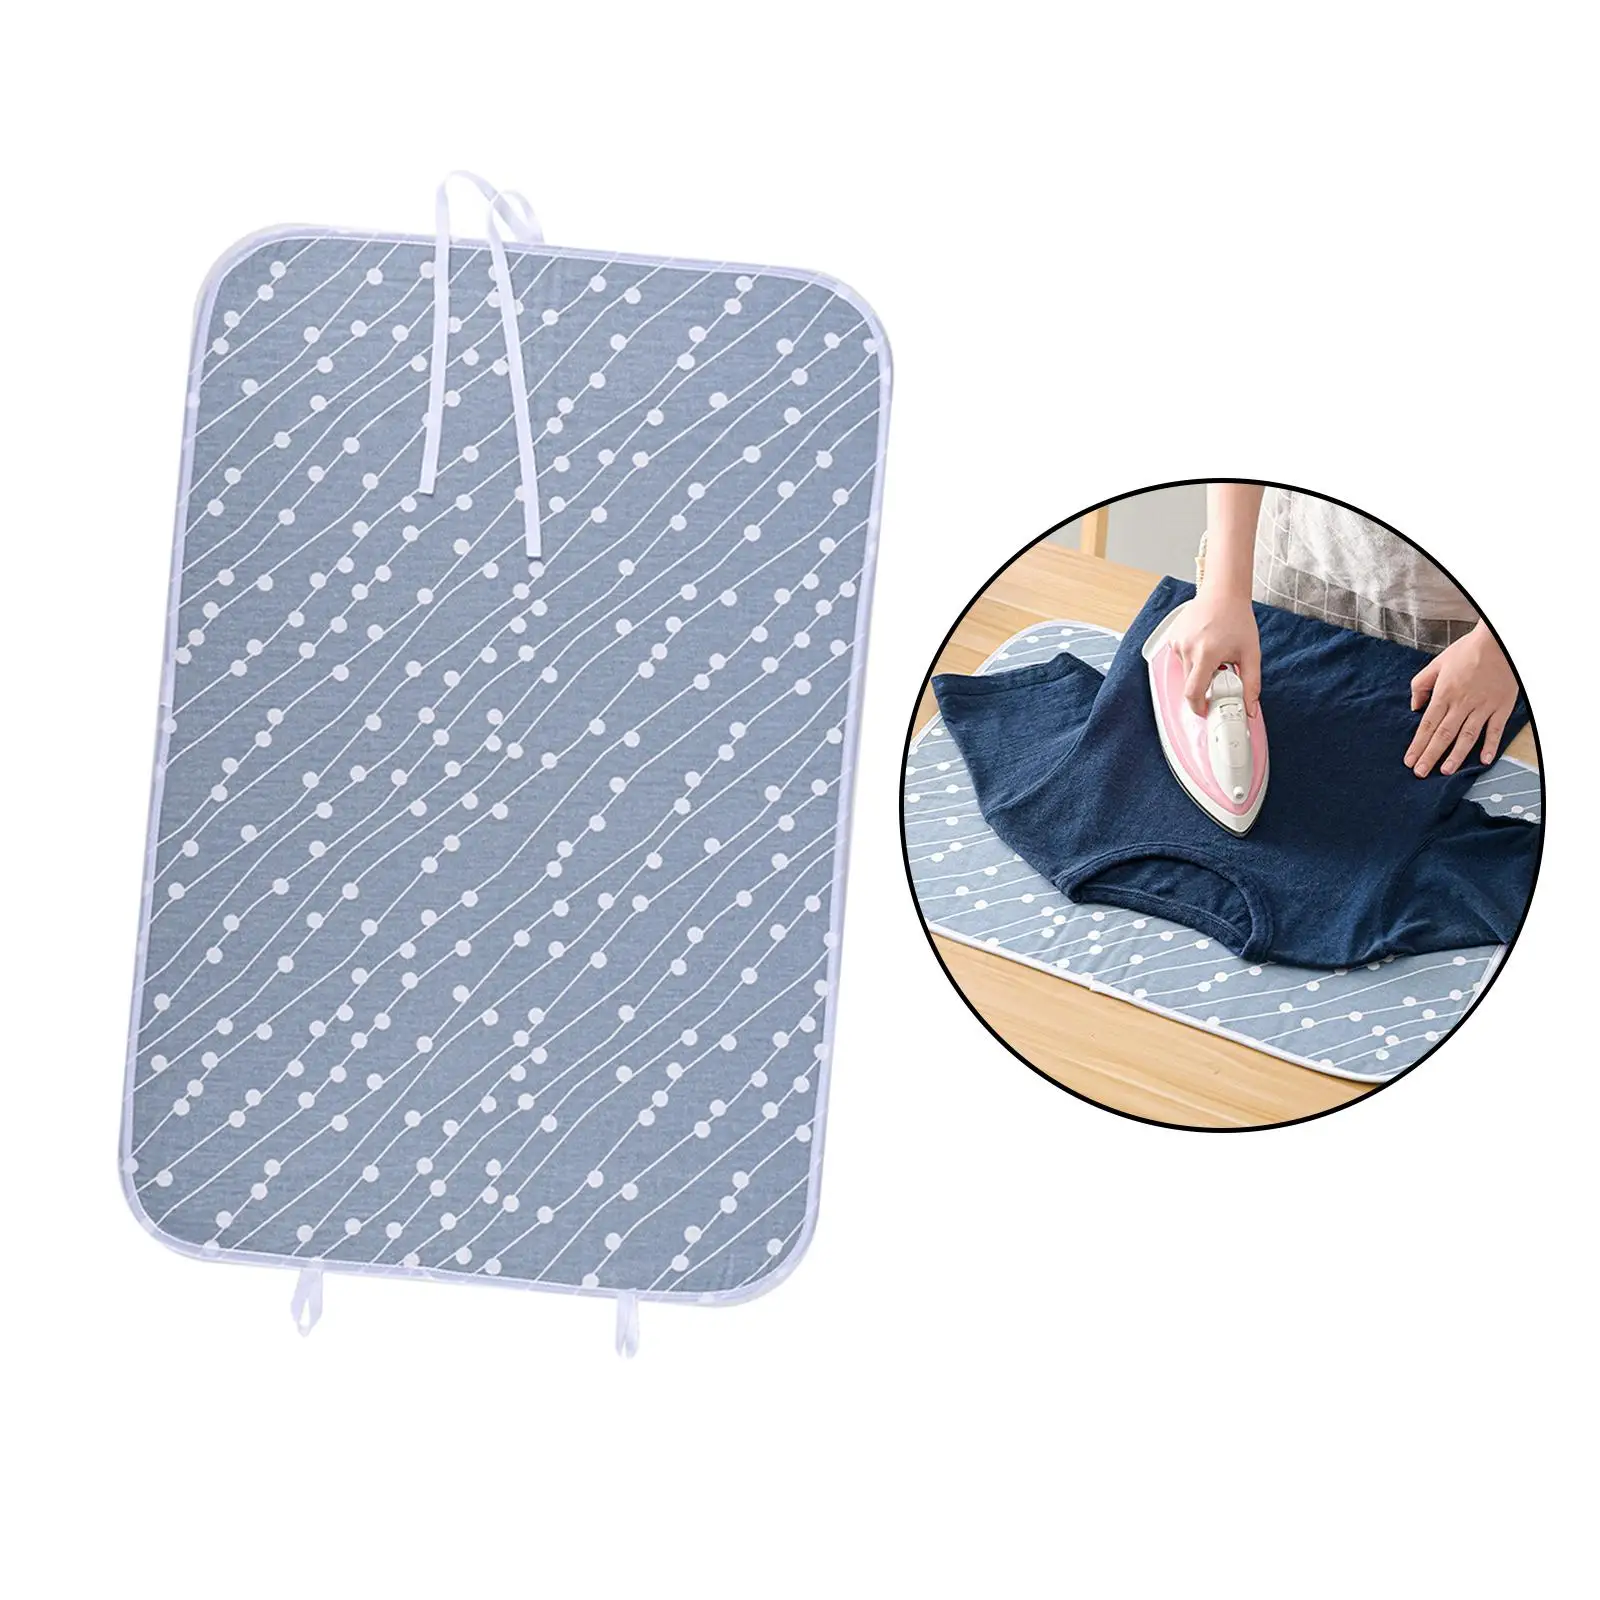 Heat Resistant Ironing Mat Folding Accessories Portable Handheld Mini Durable for Tabletop Apartment Countertop Dorm Washer